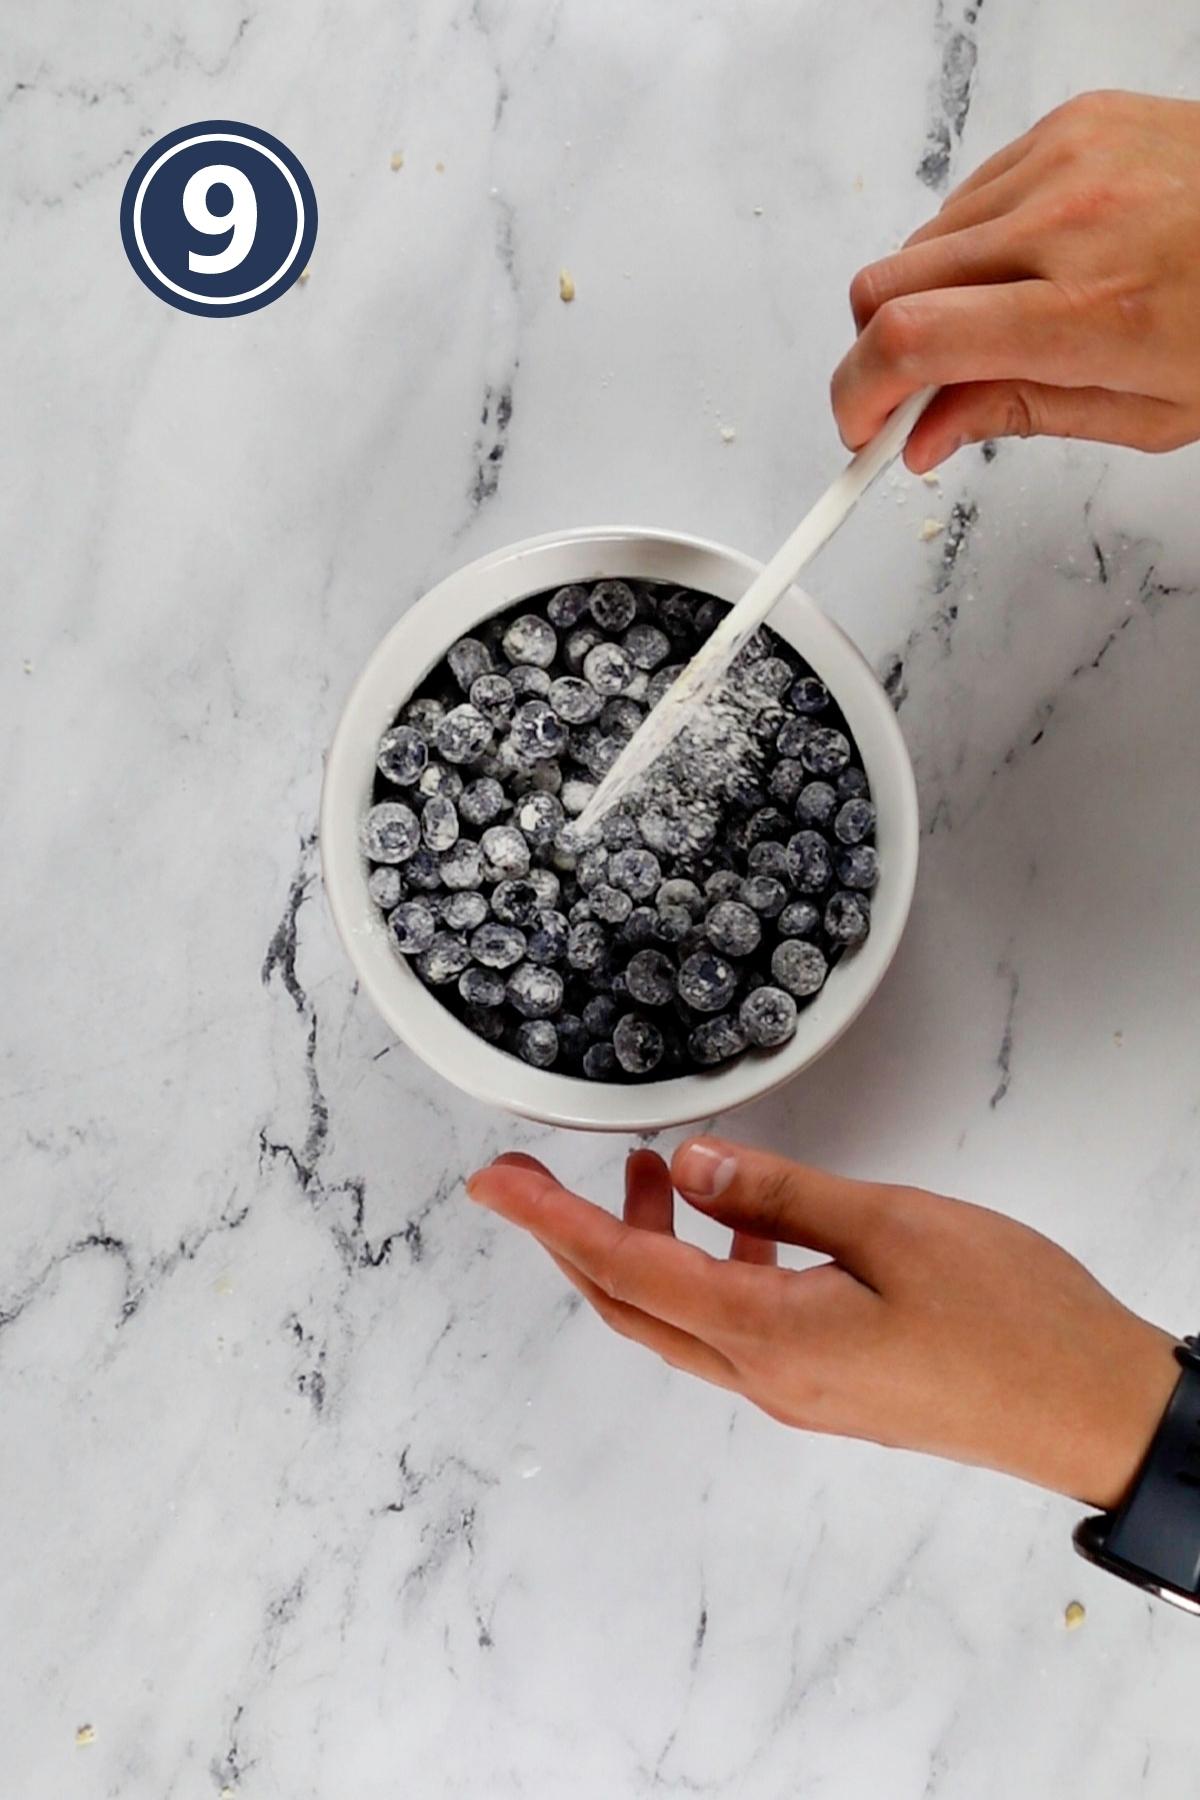 tossing the blueberries into one tablespoon of flour.